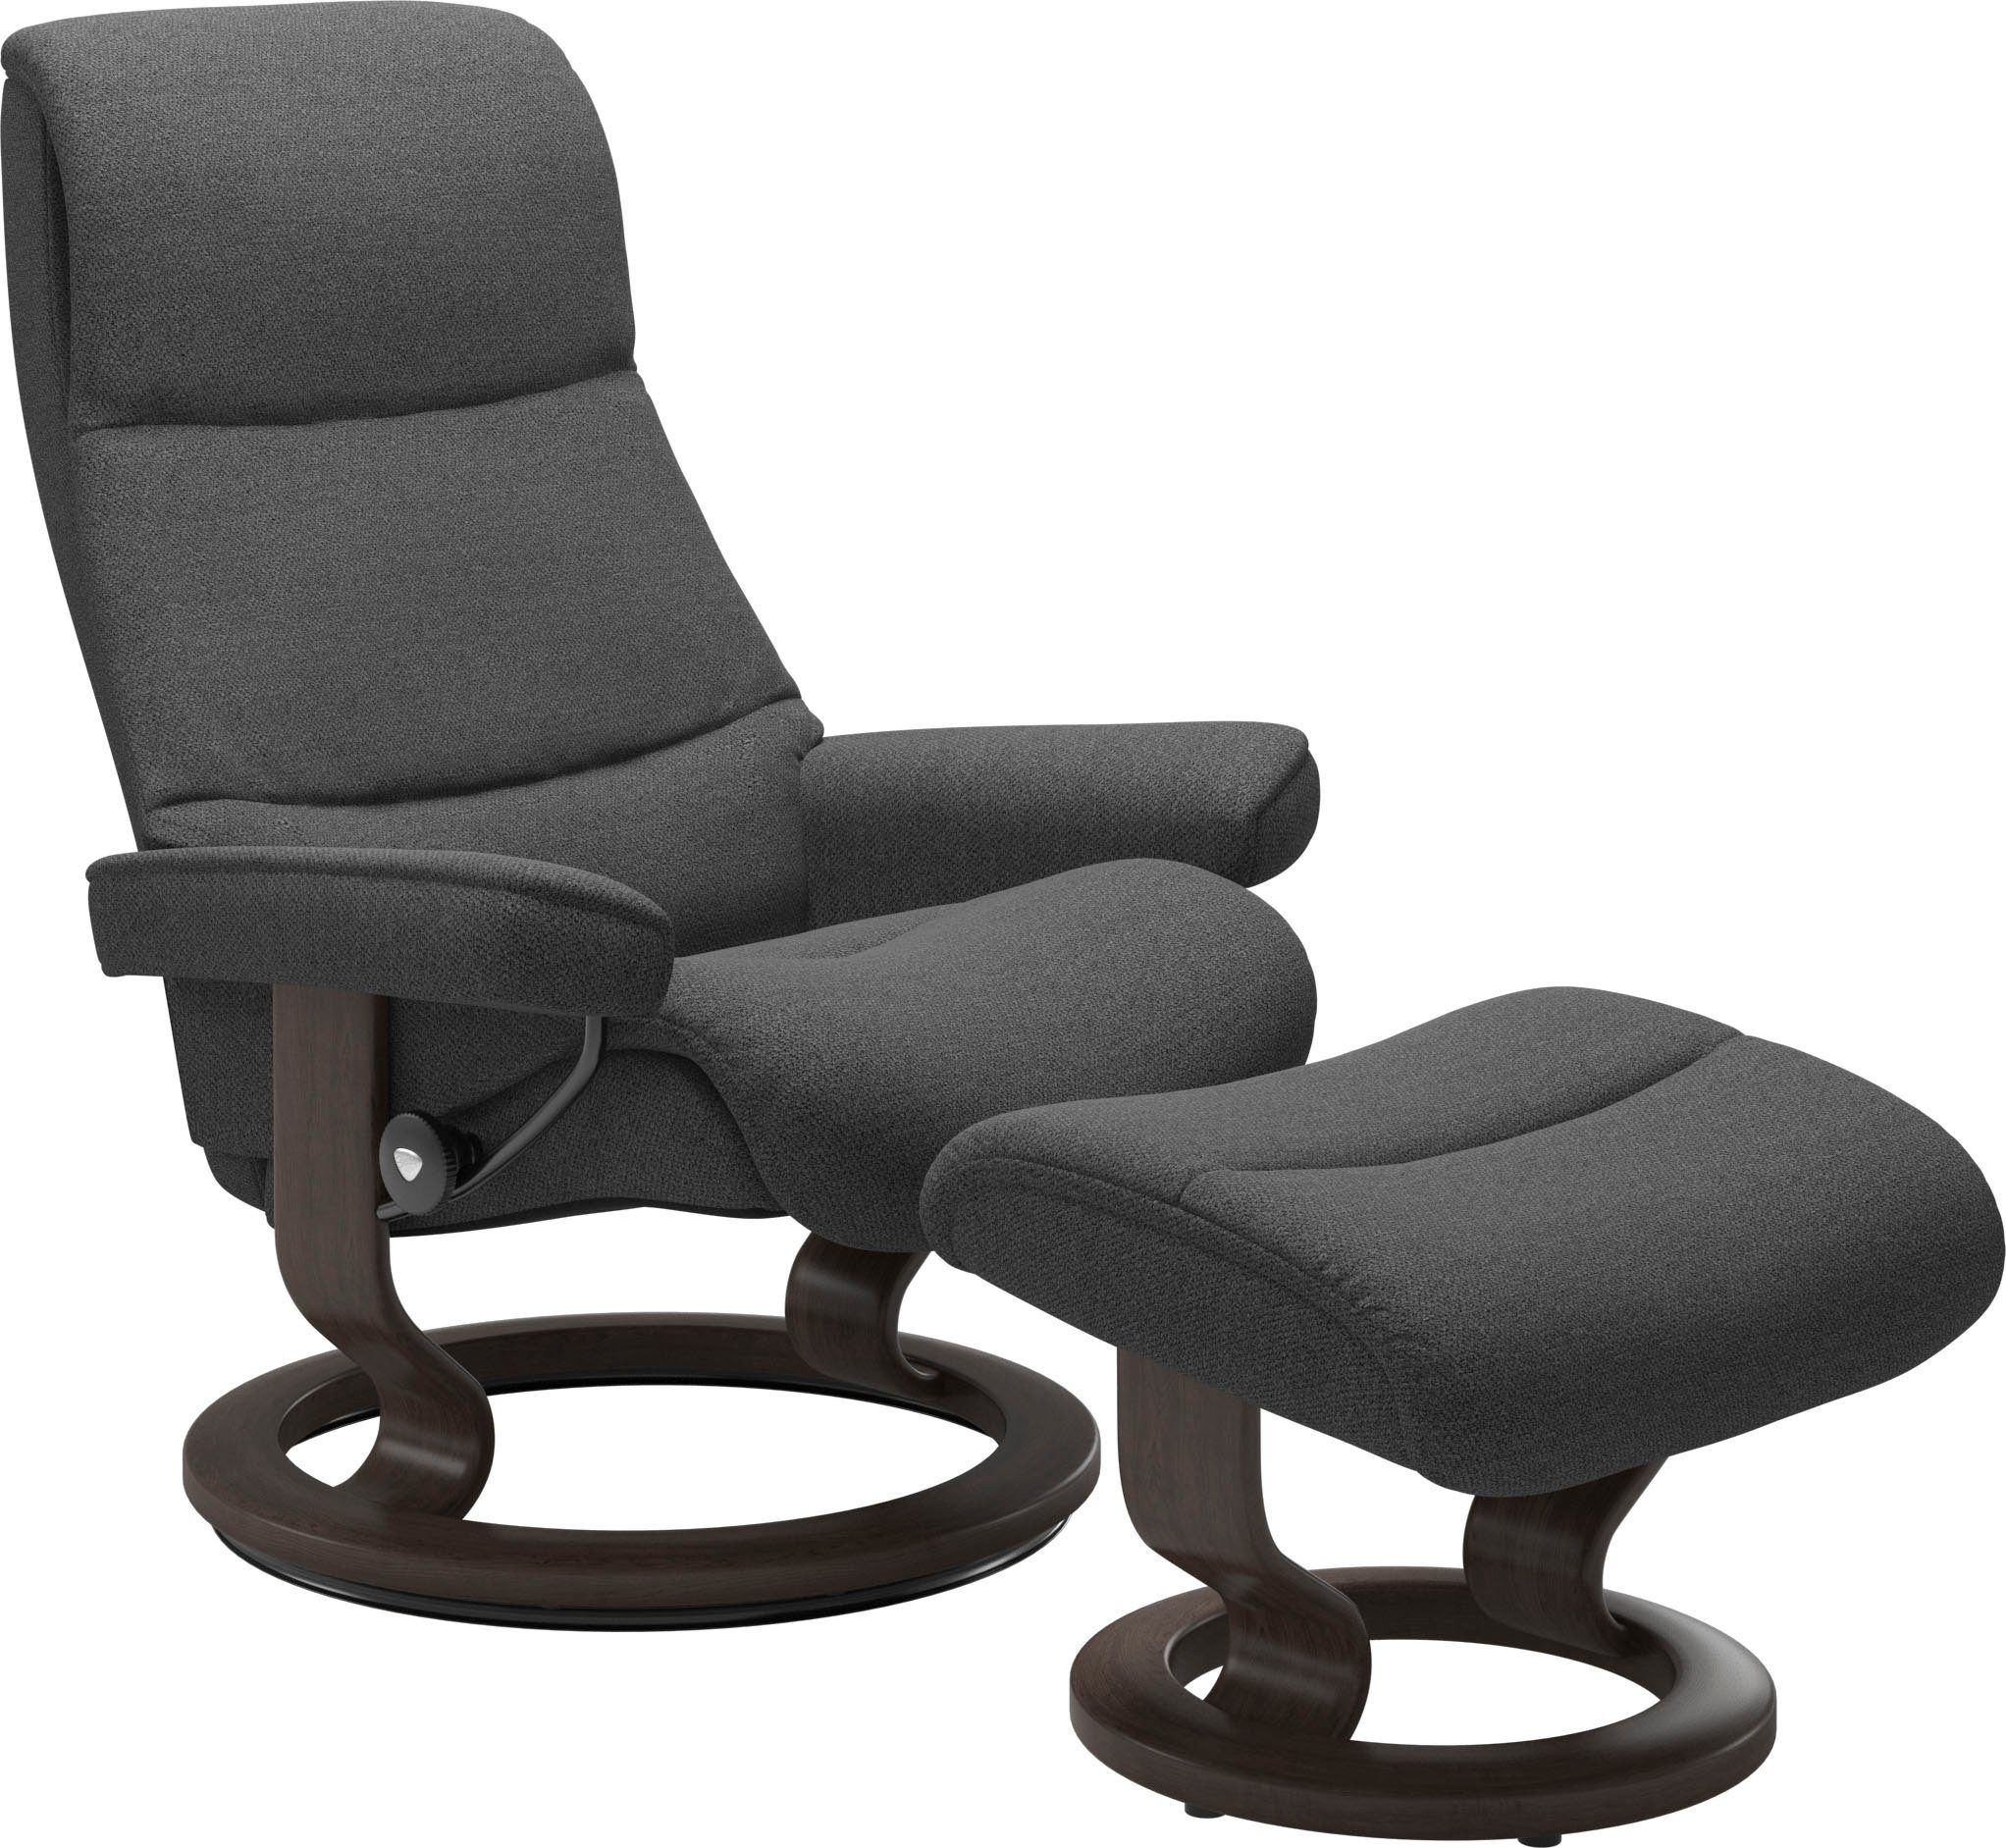 Stressless® Relaxsessel View, mit Base, Wenge Classic Größe M,Gestell